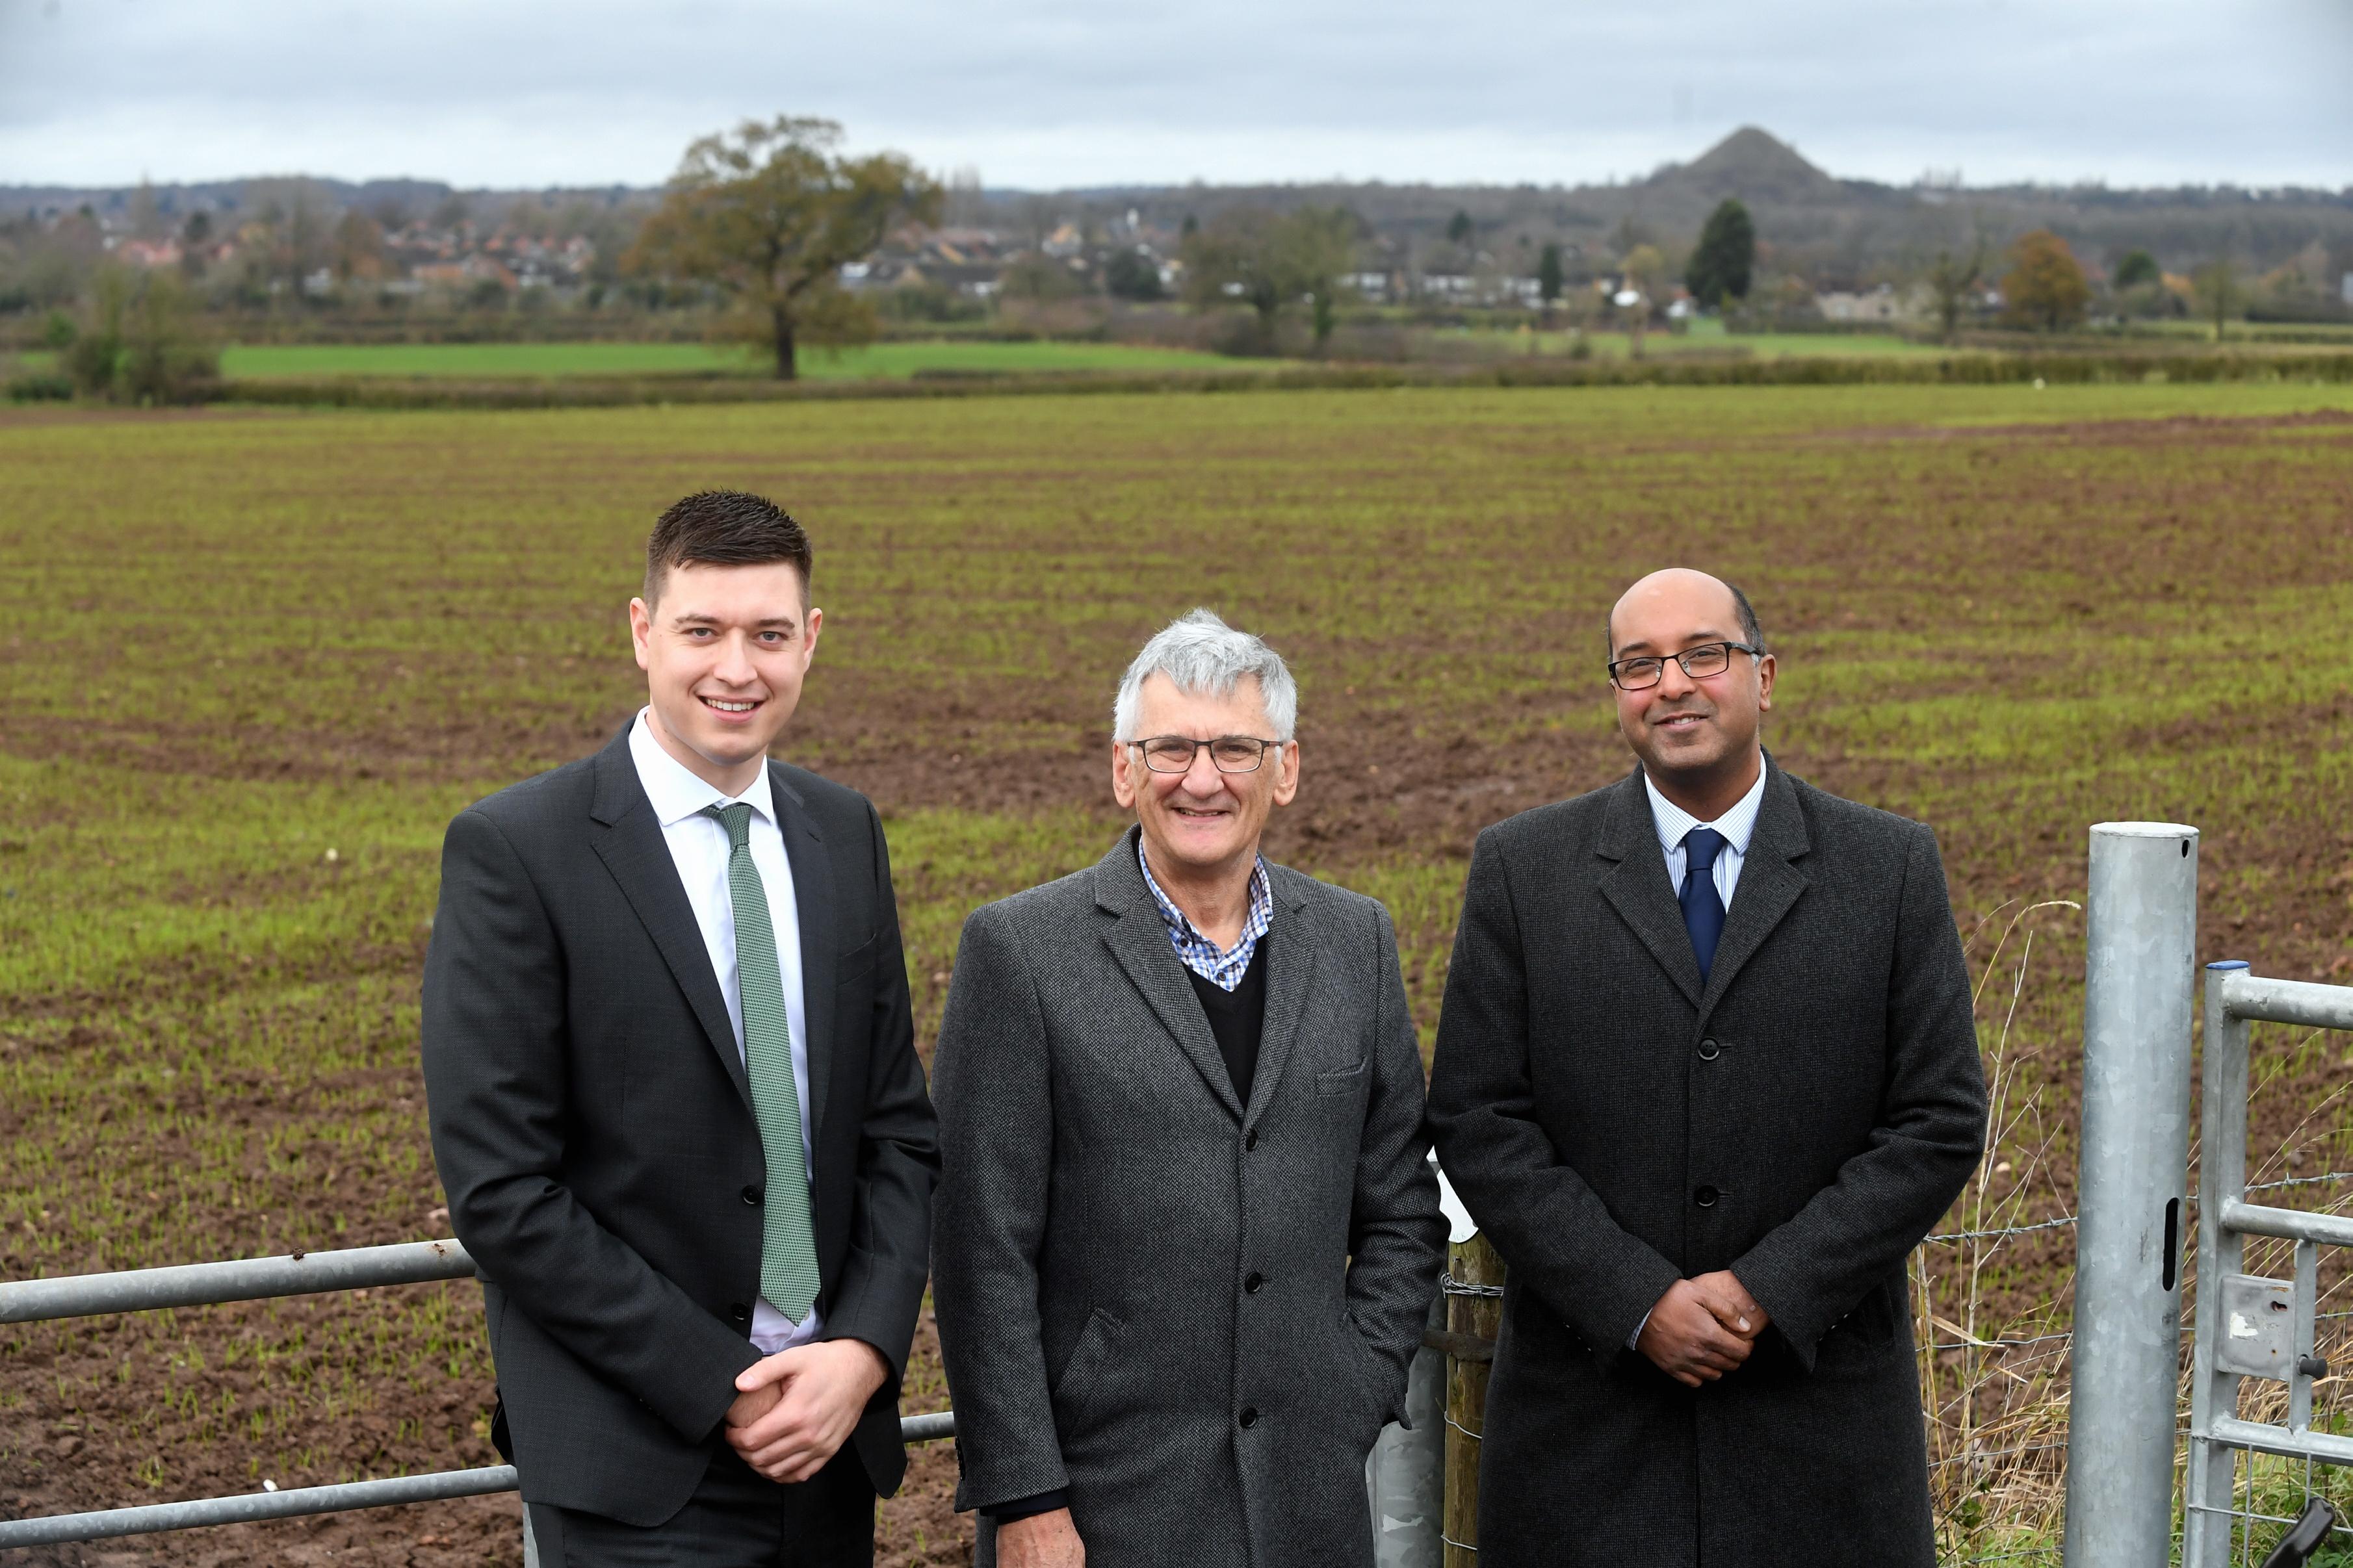 A photograph of three men in front of a field. From left to right: Adam Daniels, Peter Butlin and Stuart Buckley